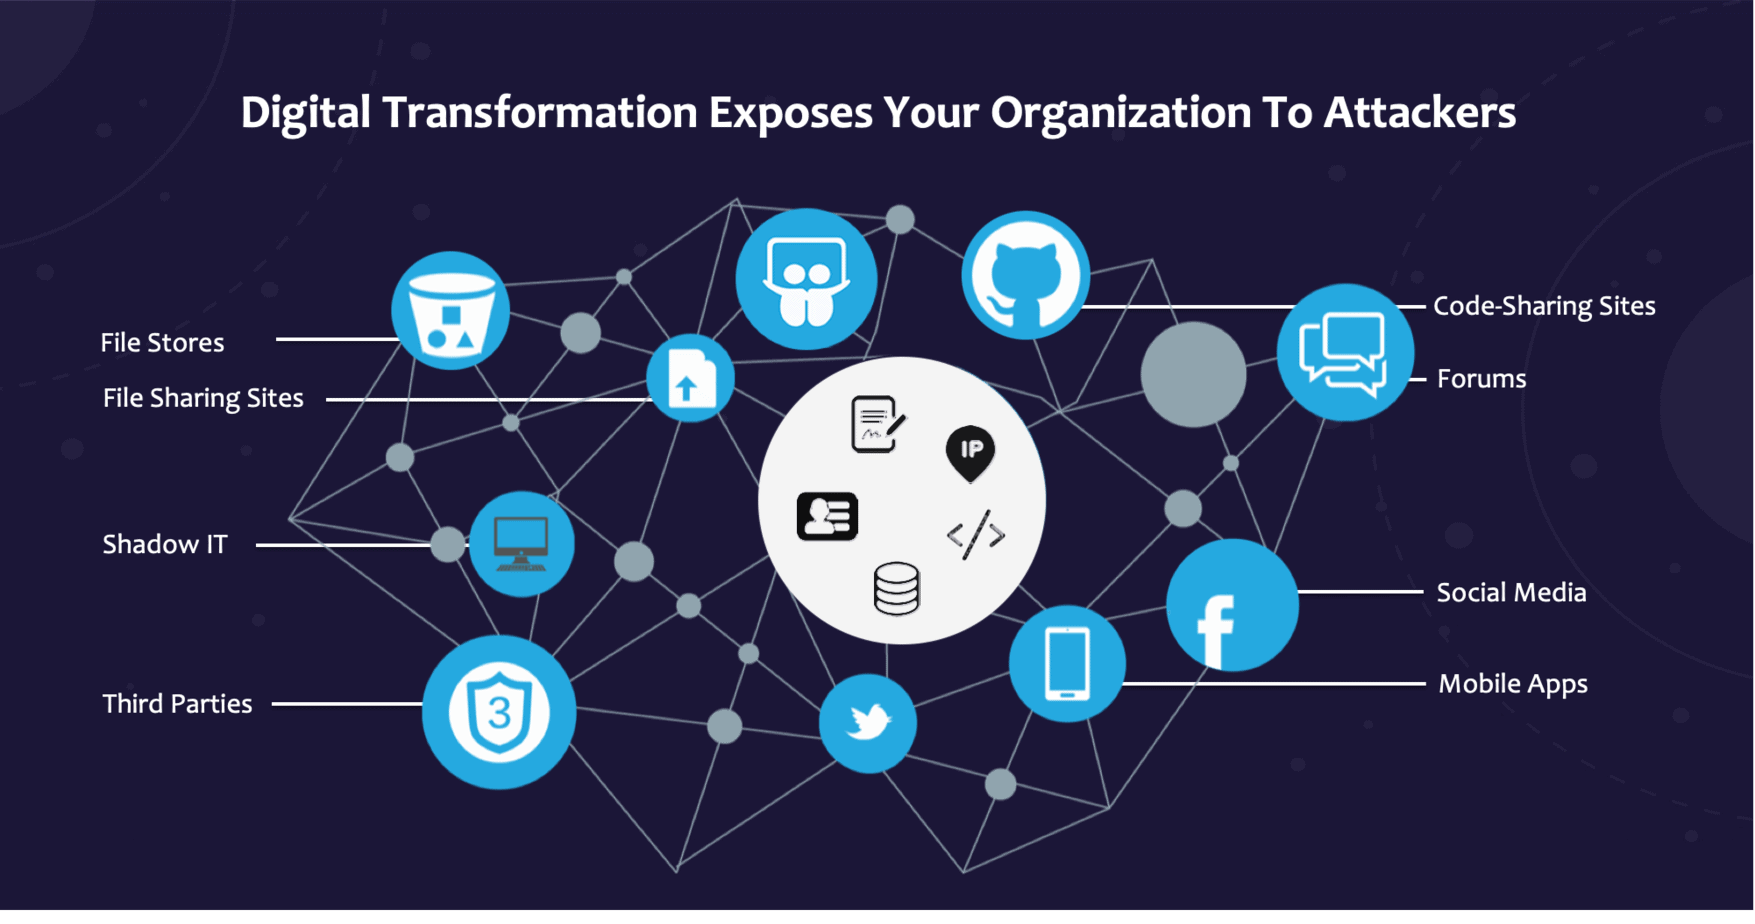 Digital Transformation Exposes your Organization to Attackers